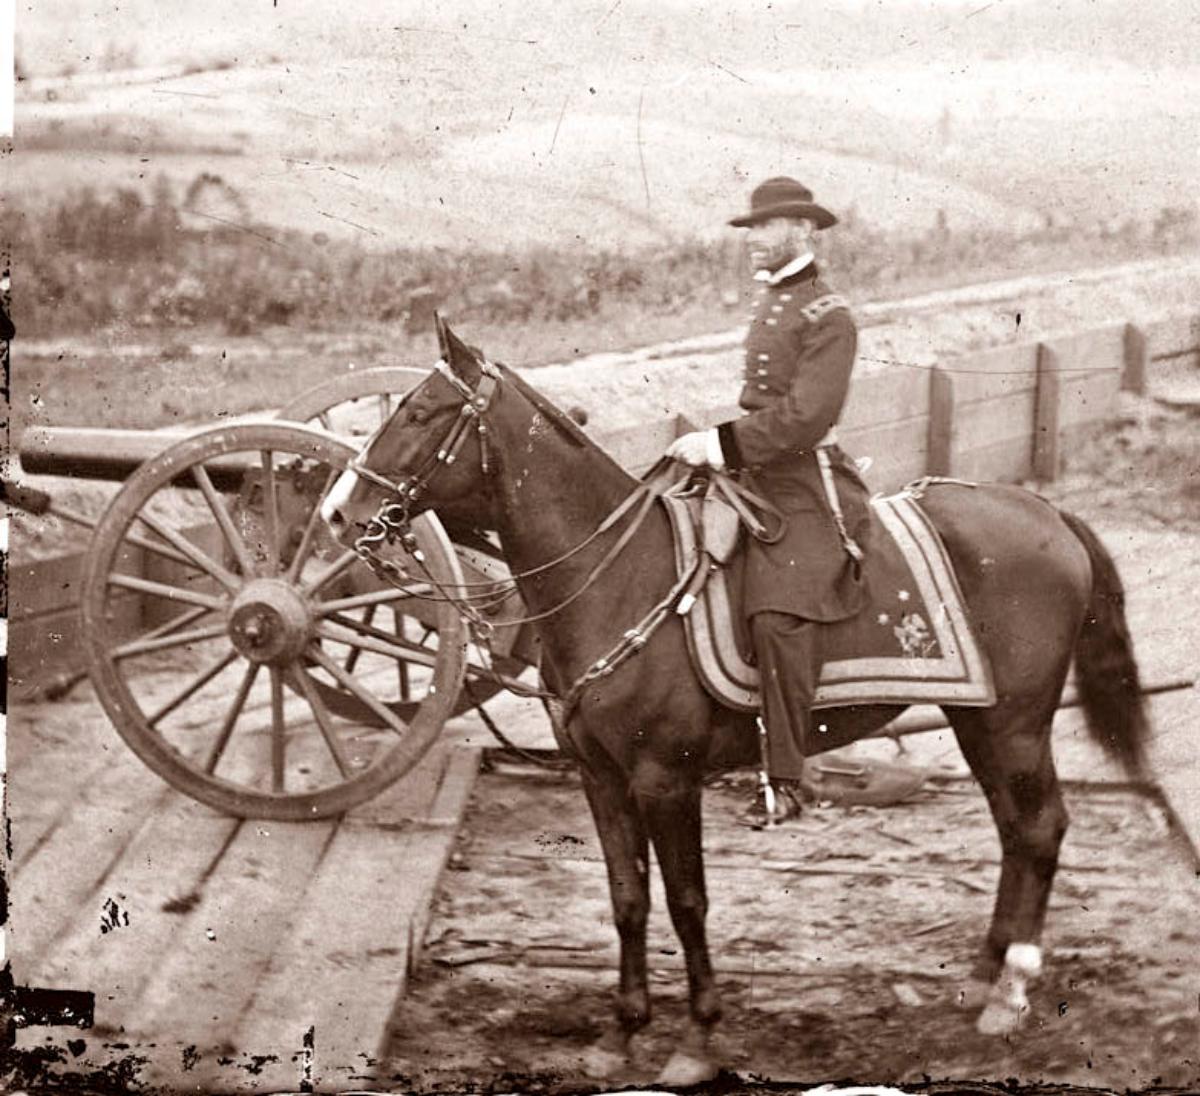 General William Tecumseh Sherman atop his steed Lexington at Federal Fort No. 7, two miles from Atlanta, 1864. A racehorse known for being the fastest four-mile thoroughbred in the U.S., Sherman rode Lexington throughout his scorched-earth Savannah campaign, the March to the Sea.